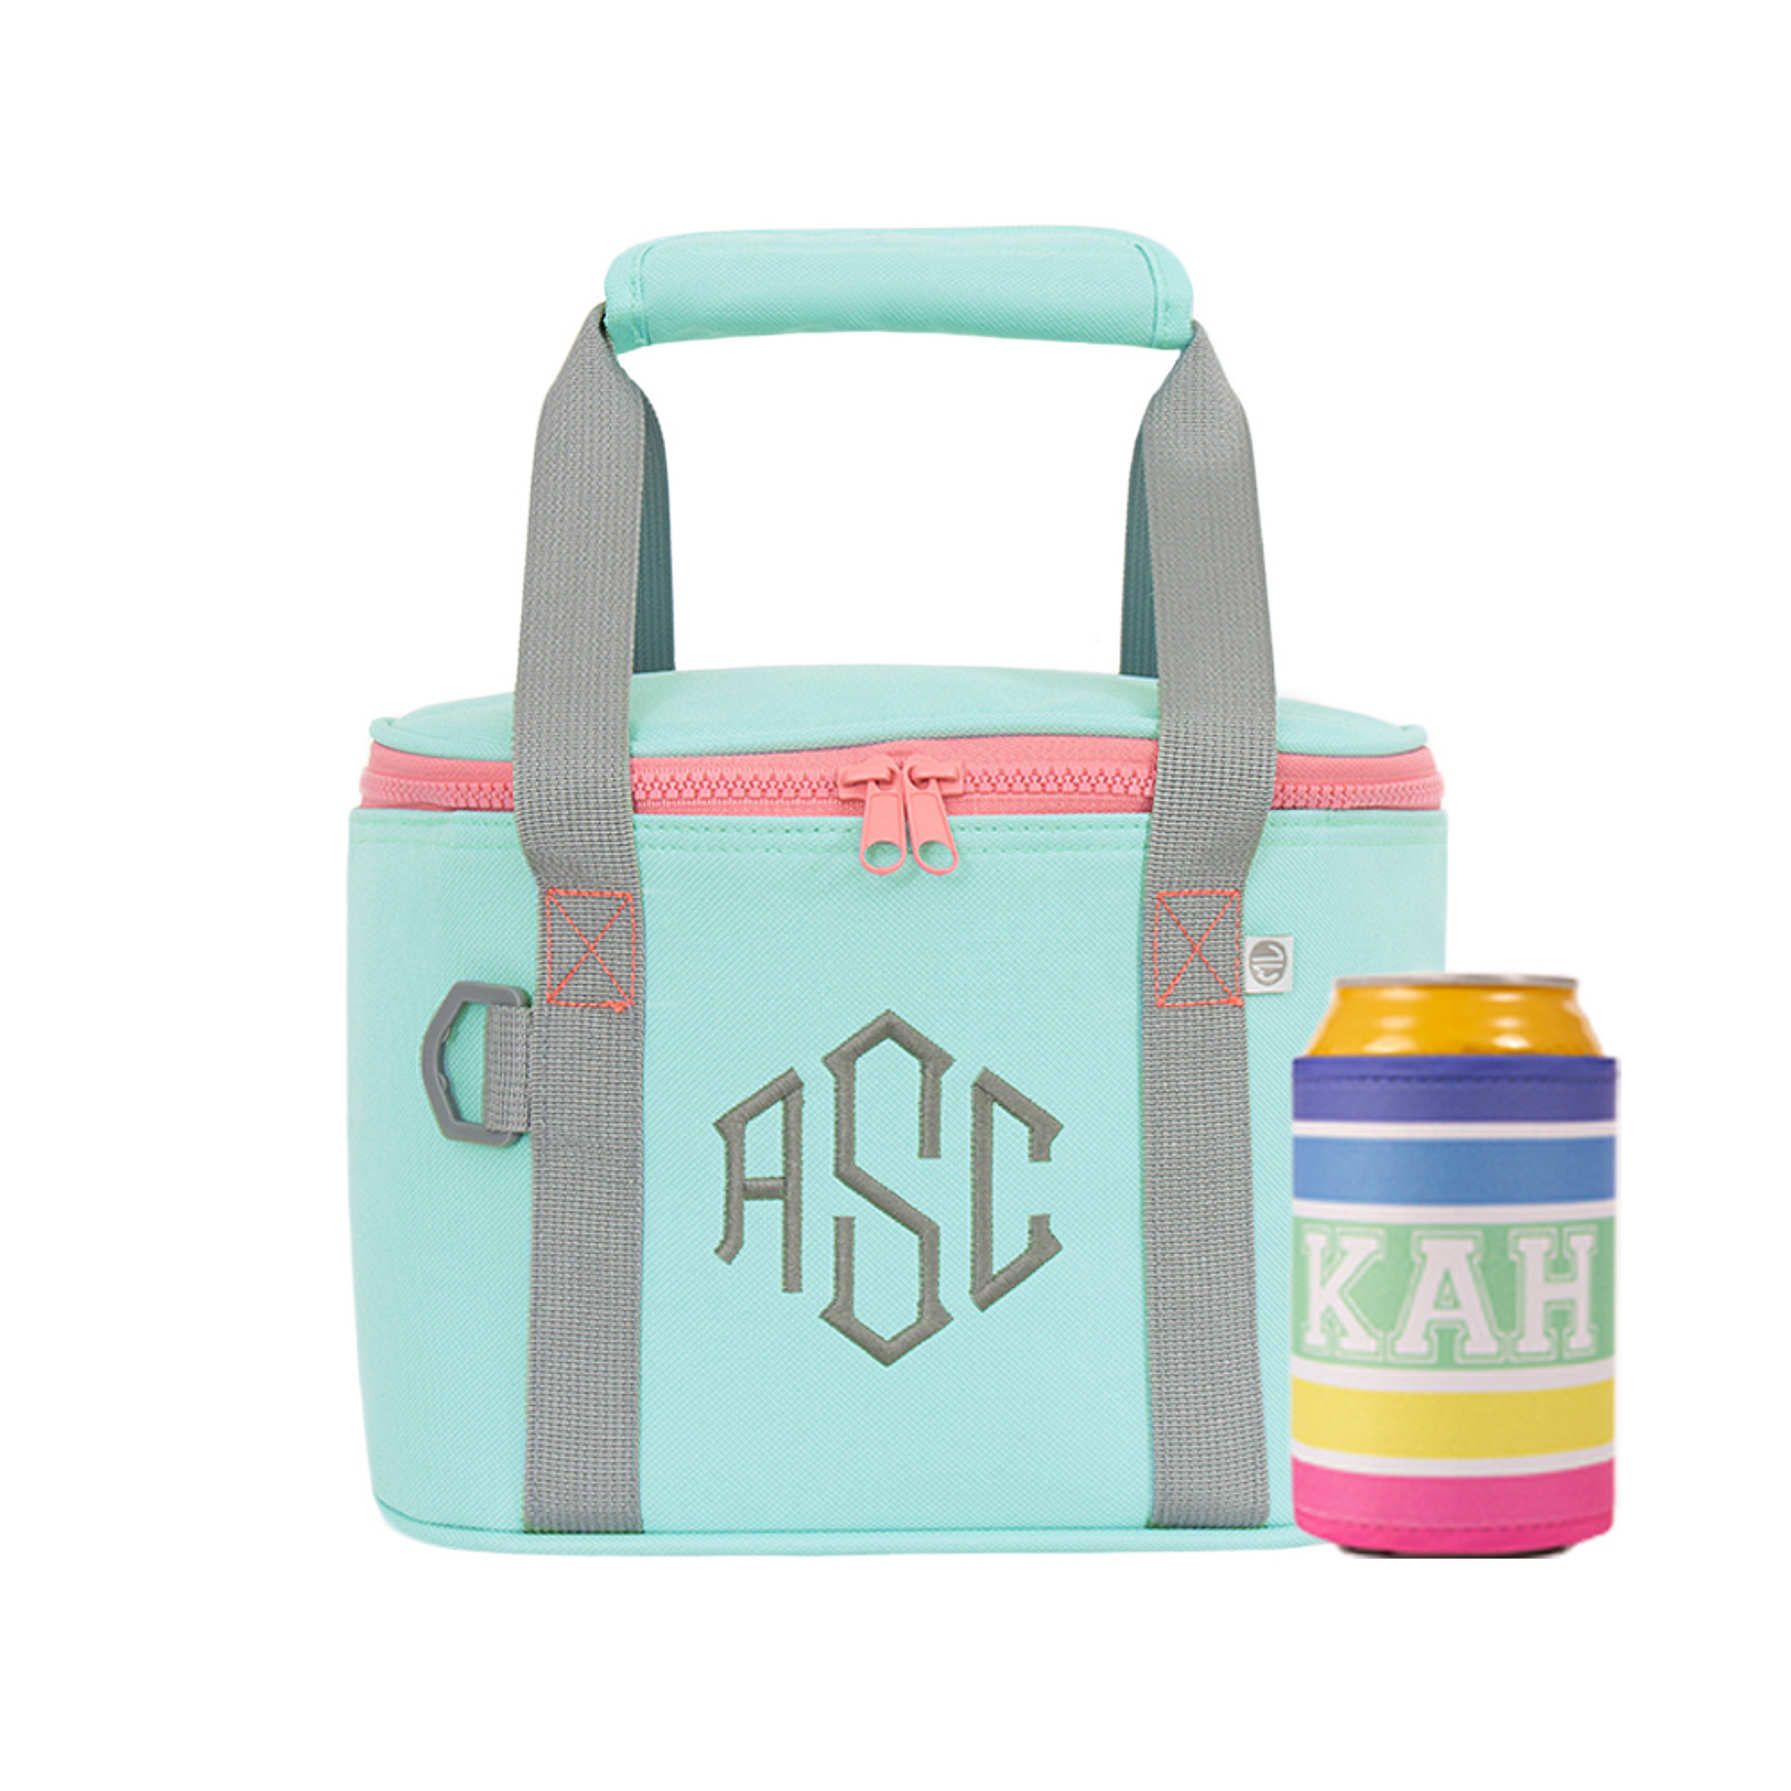 Personalized Small Cooler | Marleylilly